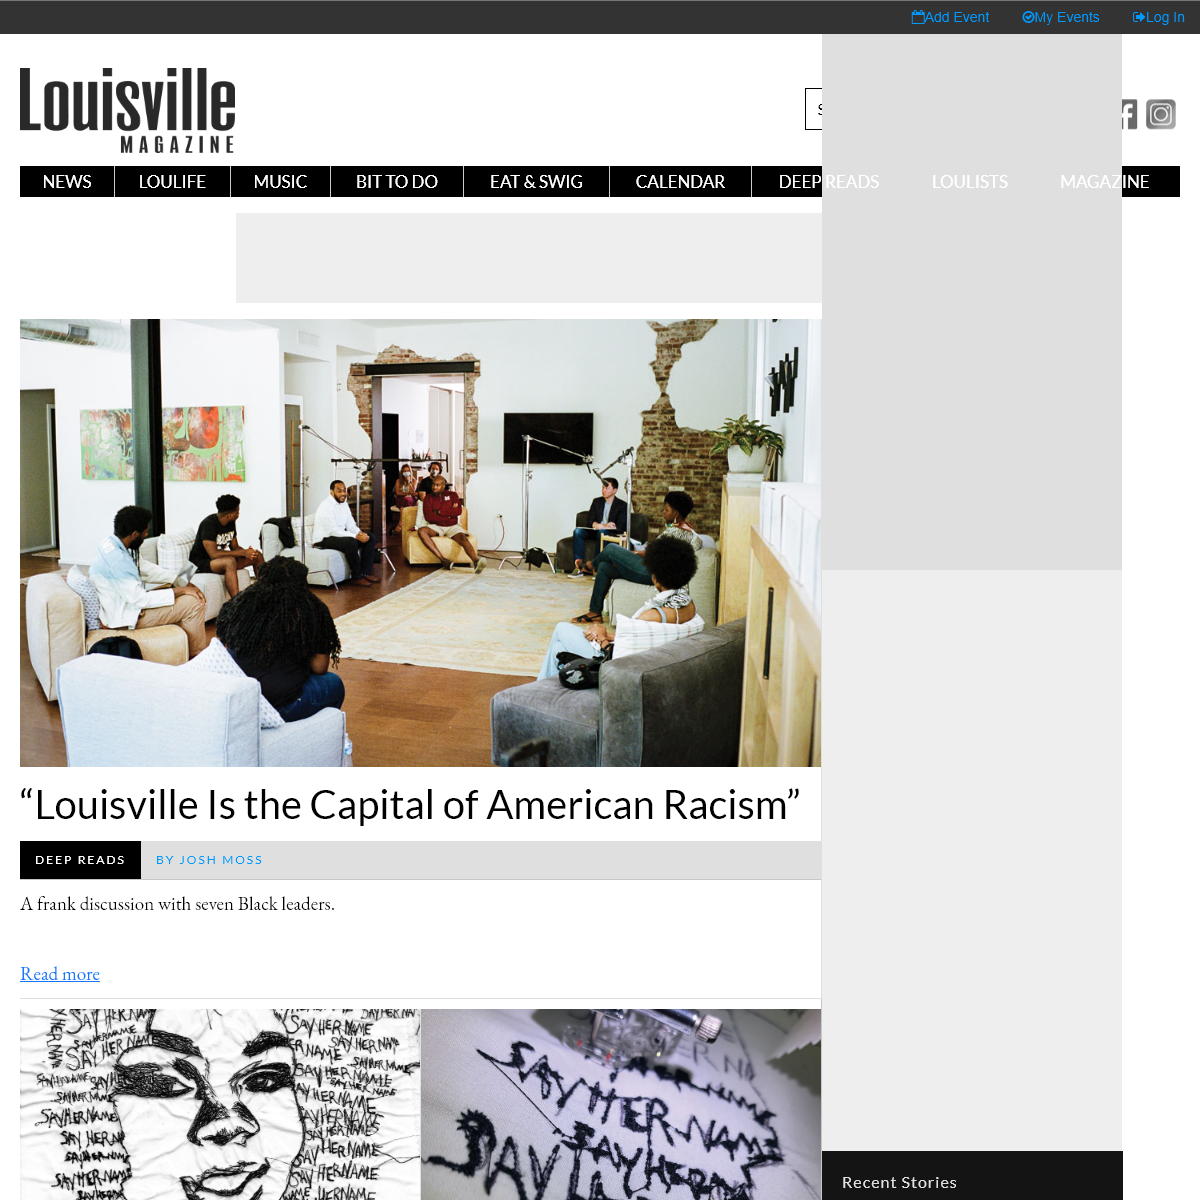 Louisville.com - The leading voice on Louisville news, art and culture for over 65 years.